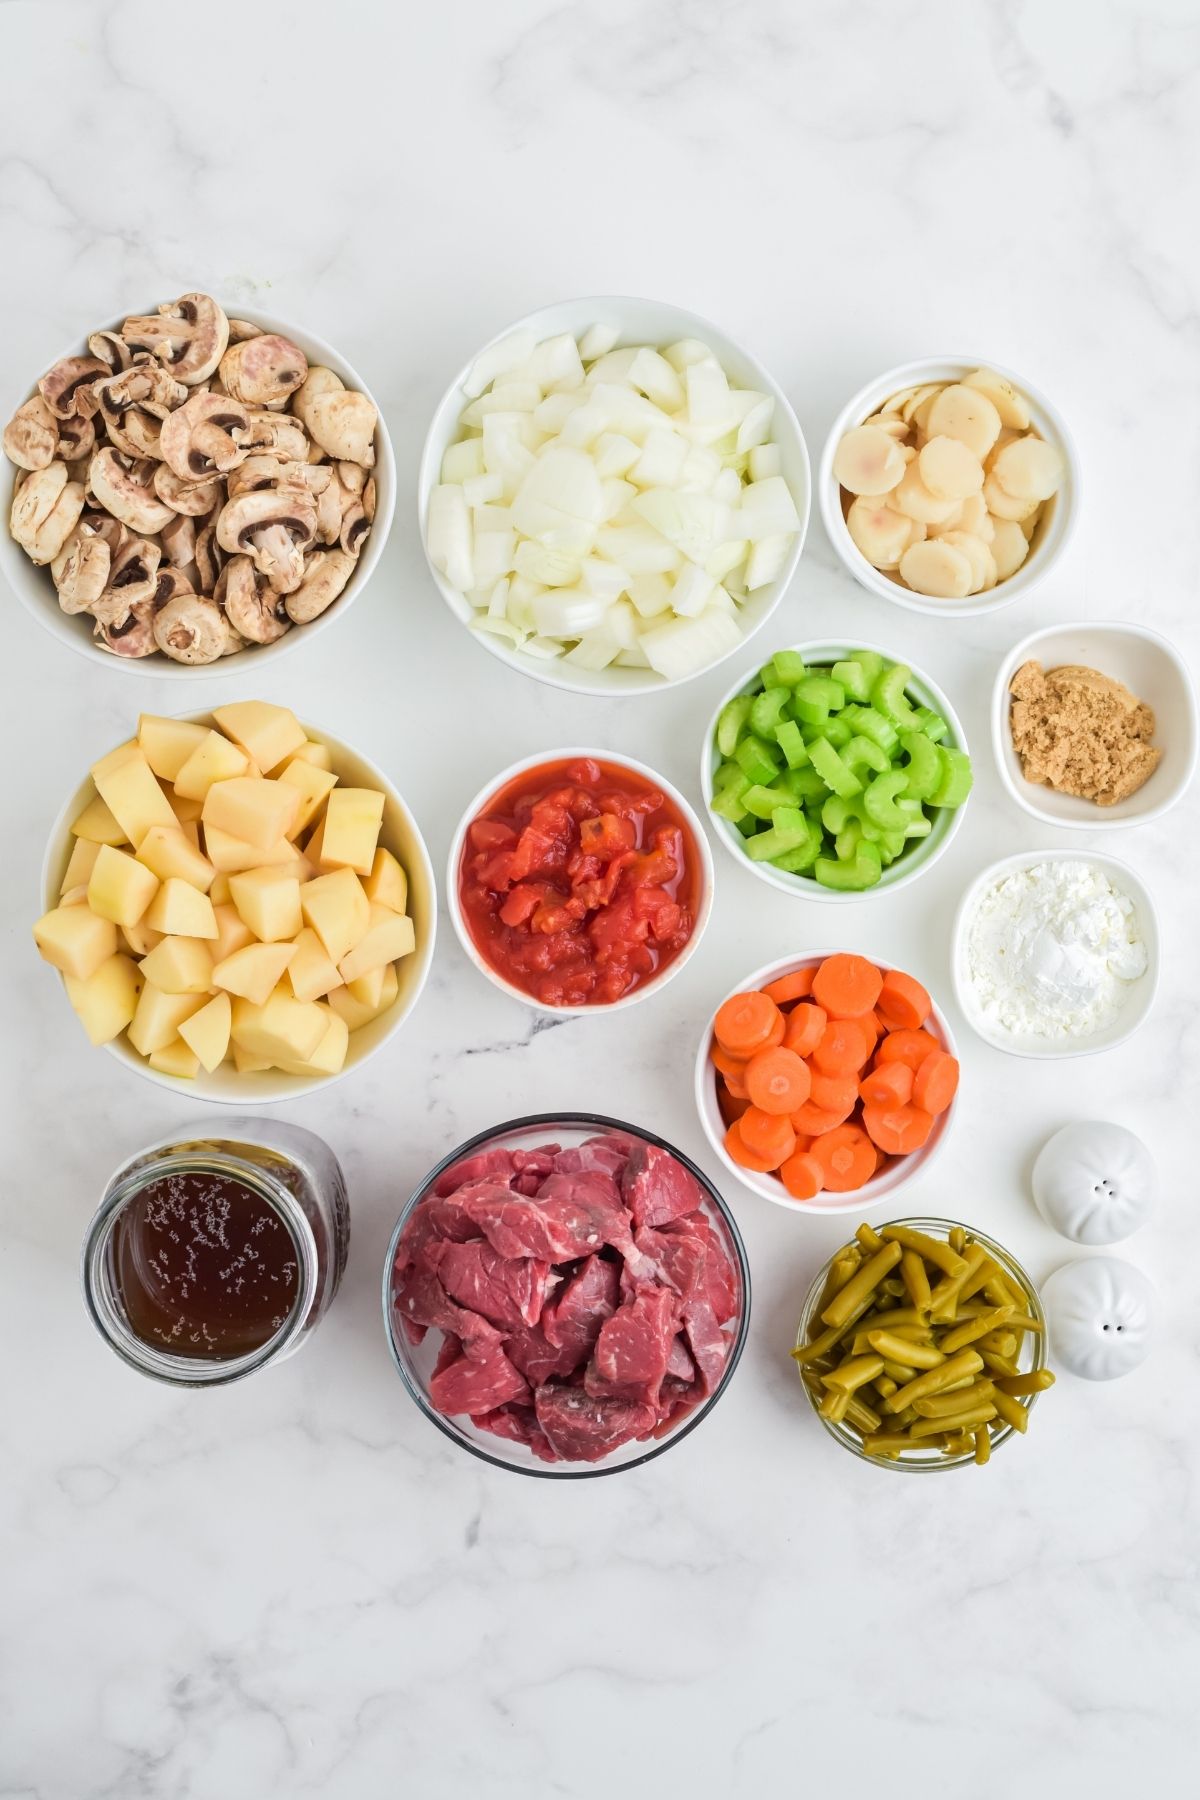 ingredients in white bowls on white counter: mushrooms; onions, water chesnuts, brown sugar, celery, tomato paste, carrots, green beans, potatoes, beef cubes, beef broth